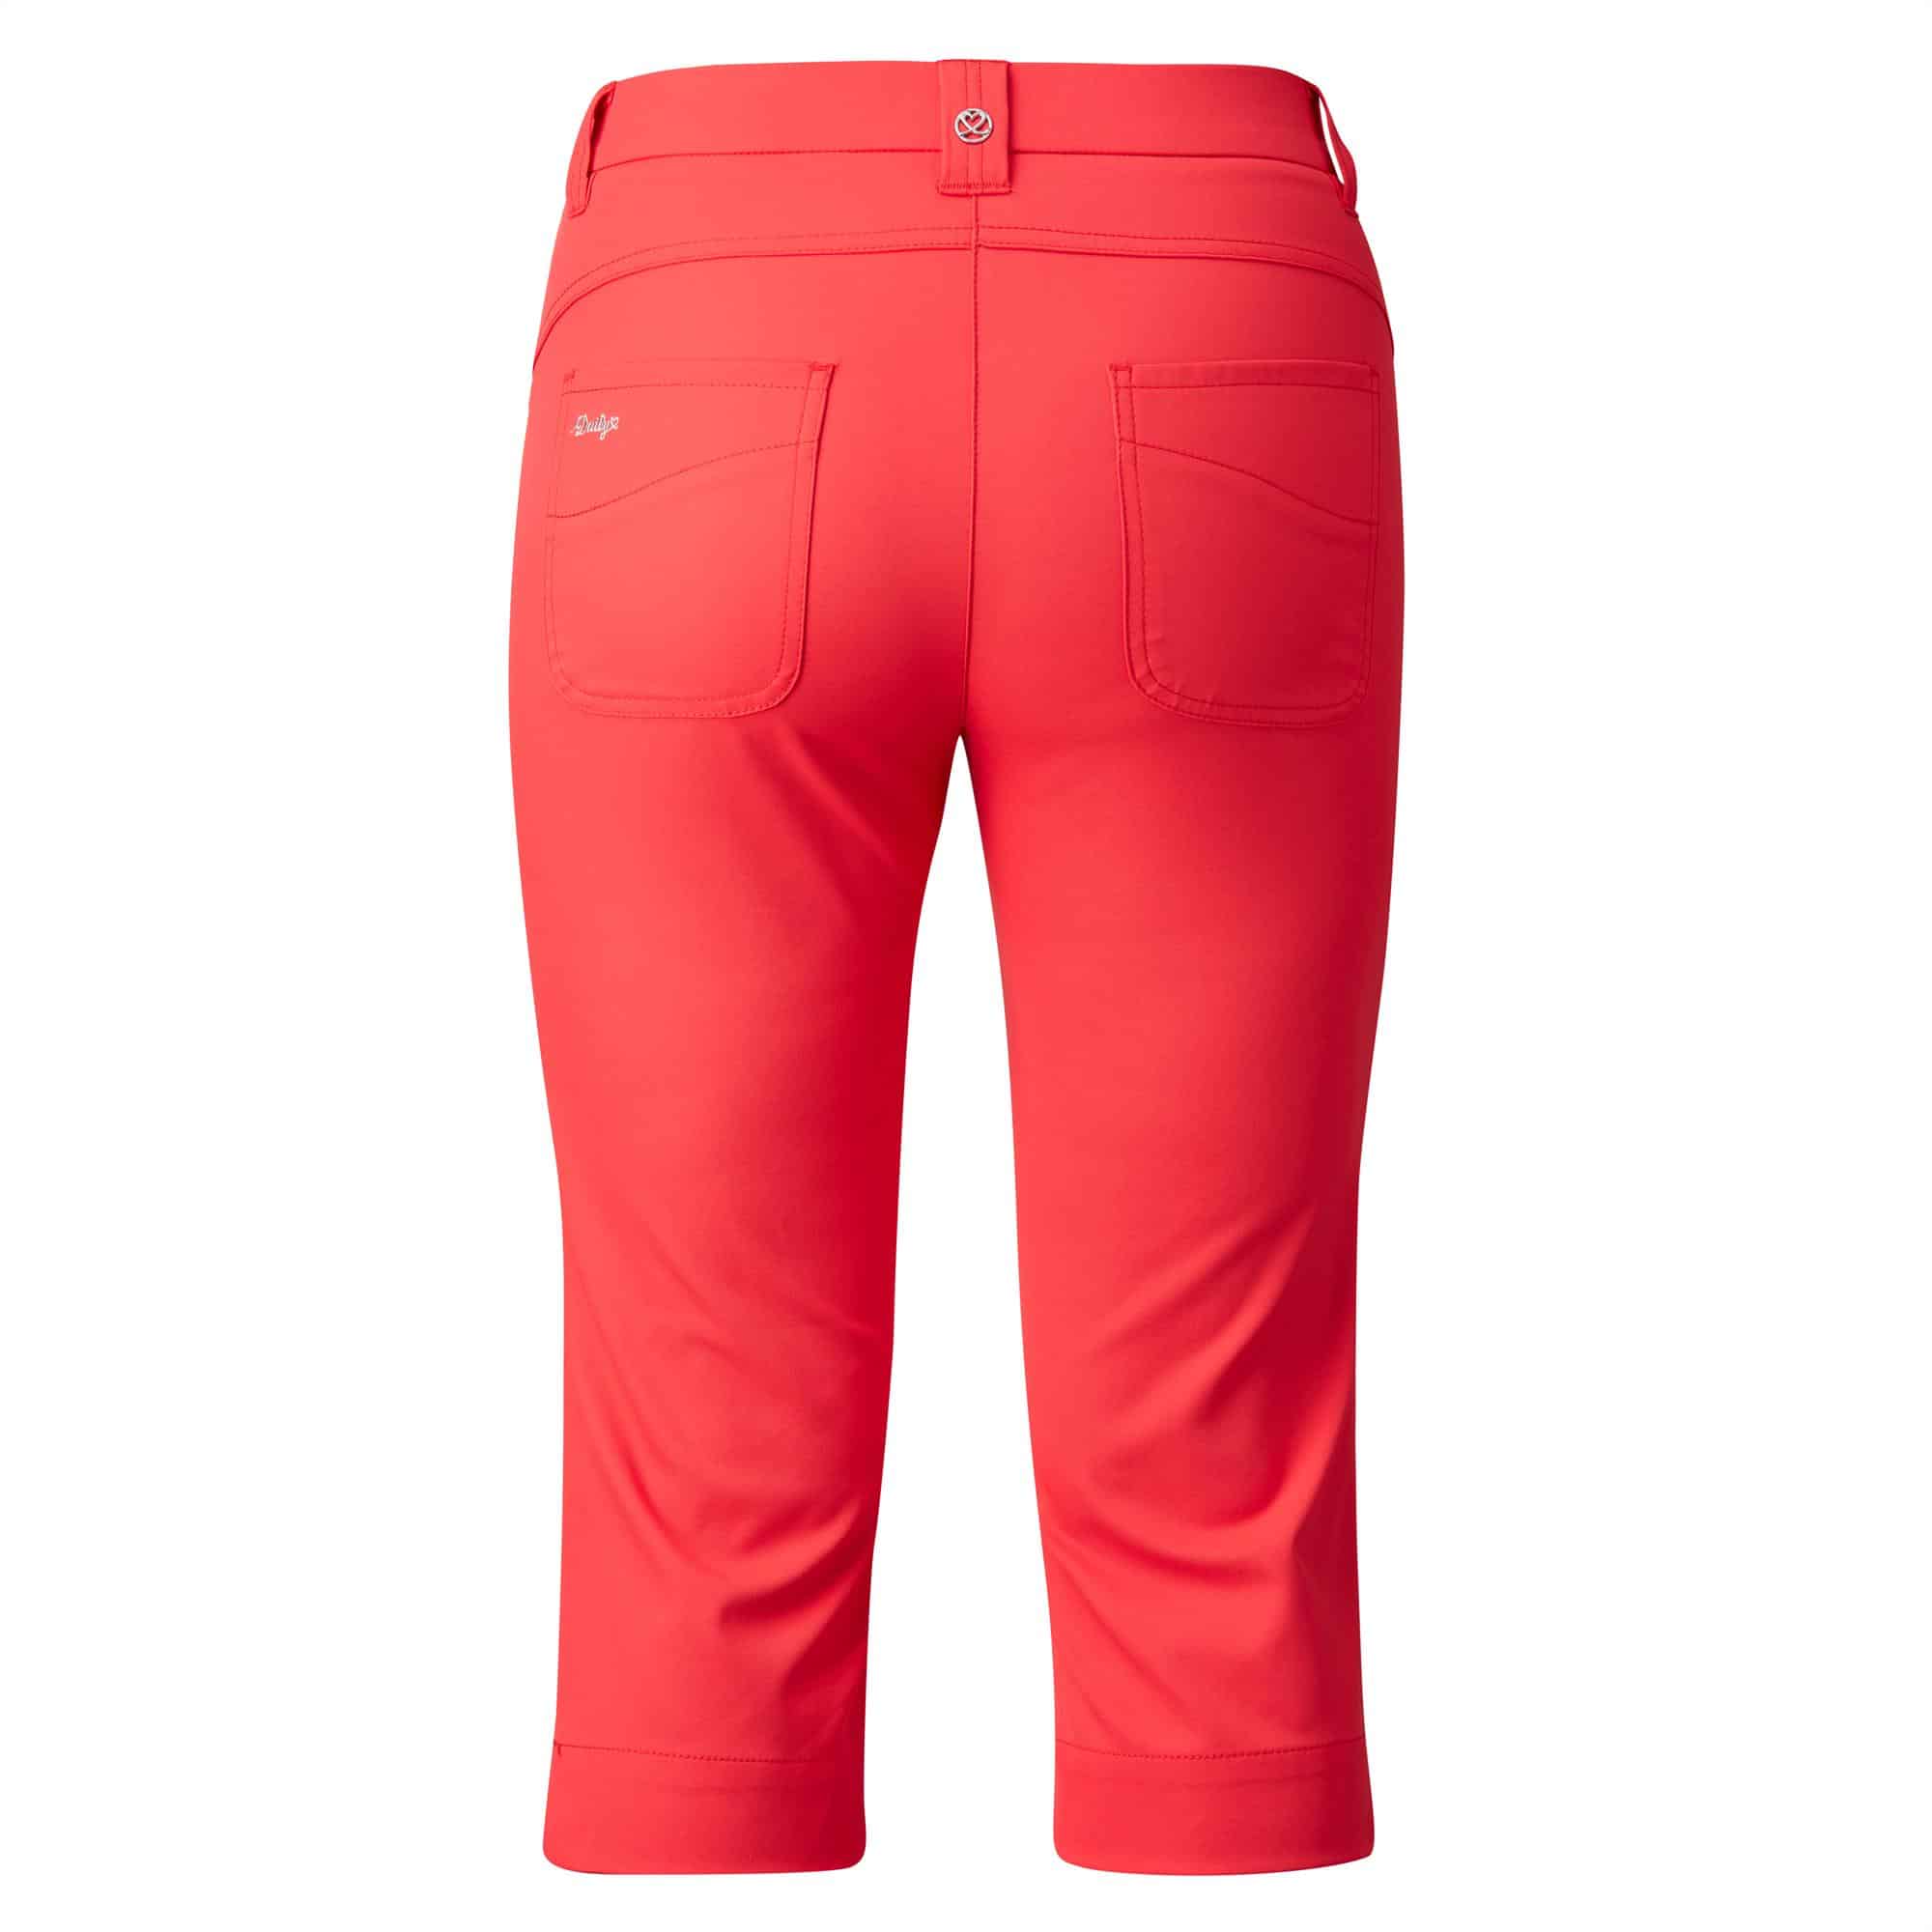 NEW Jofit Golf Belted Flare Capri Pants Womens Size 6 Orange 715A 00987590  - Mikes Golf Outlet